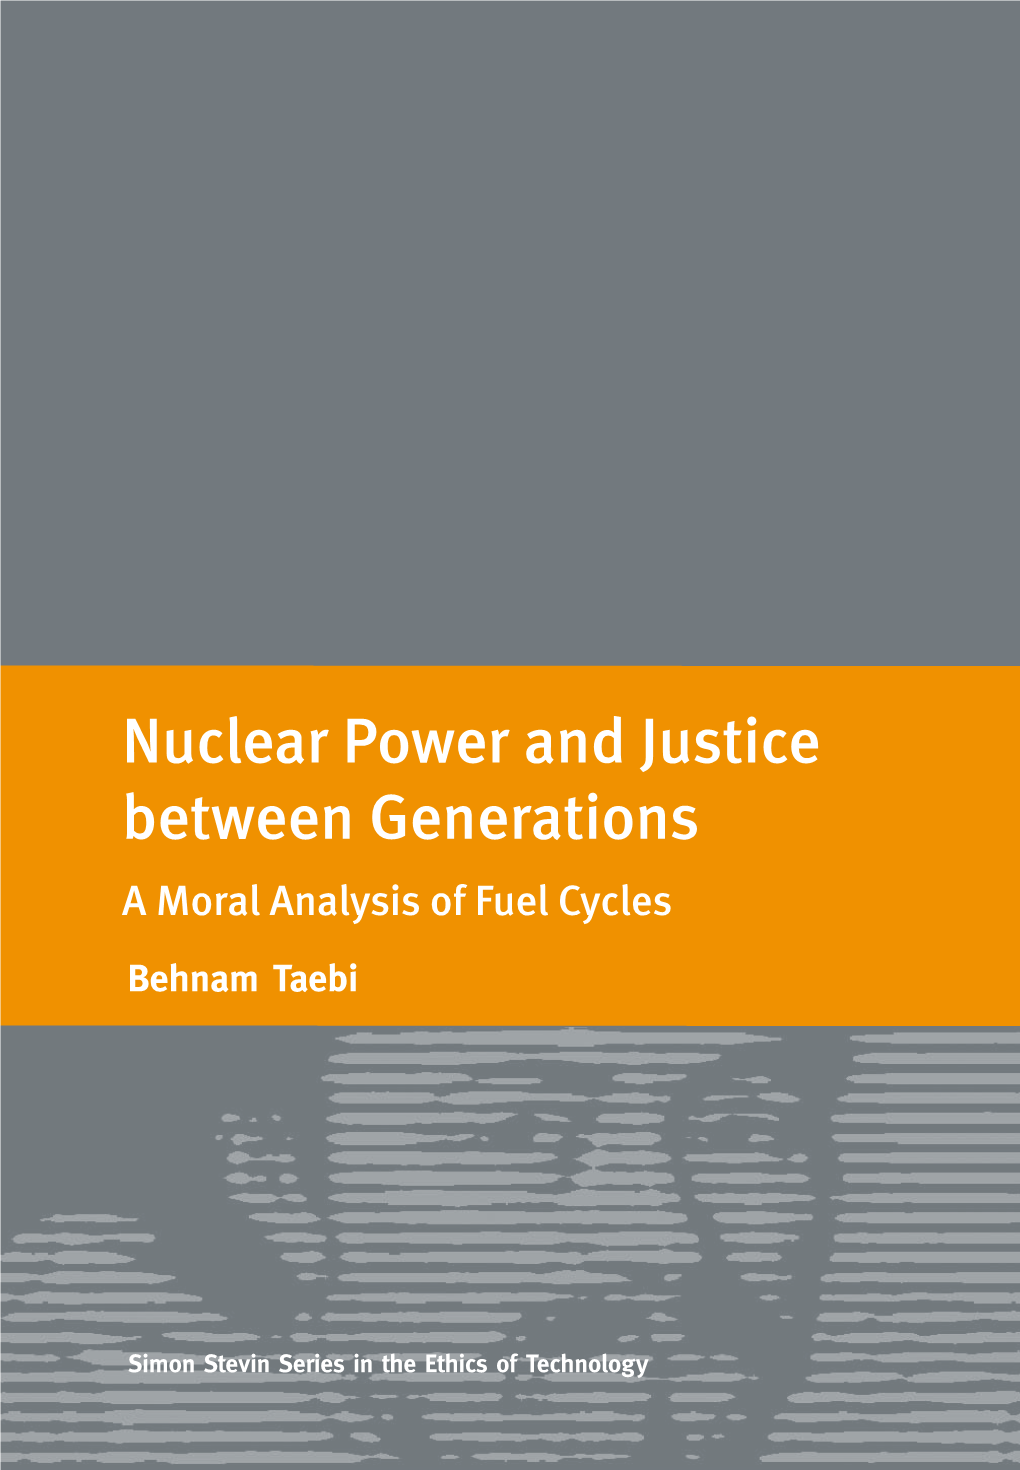 Nuclear Power and Justice Between Generations (Uranium) That Will Eventually Not Be Available to Future Generations